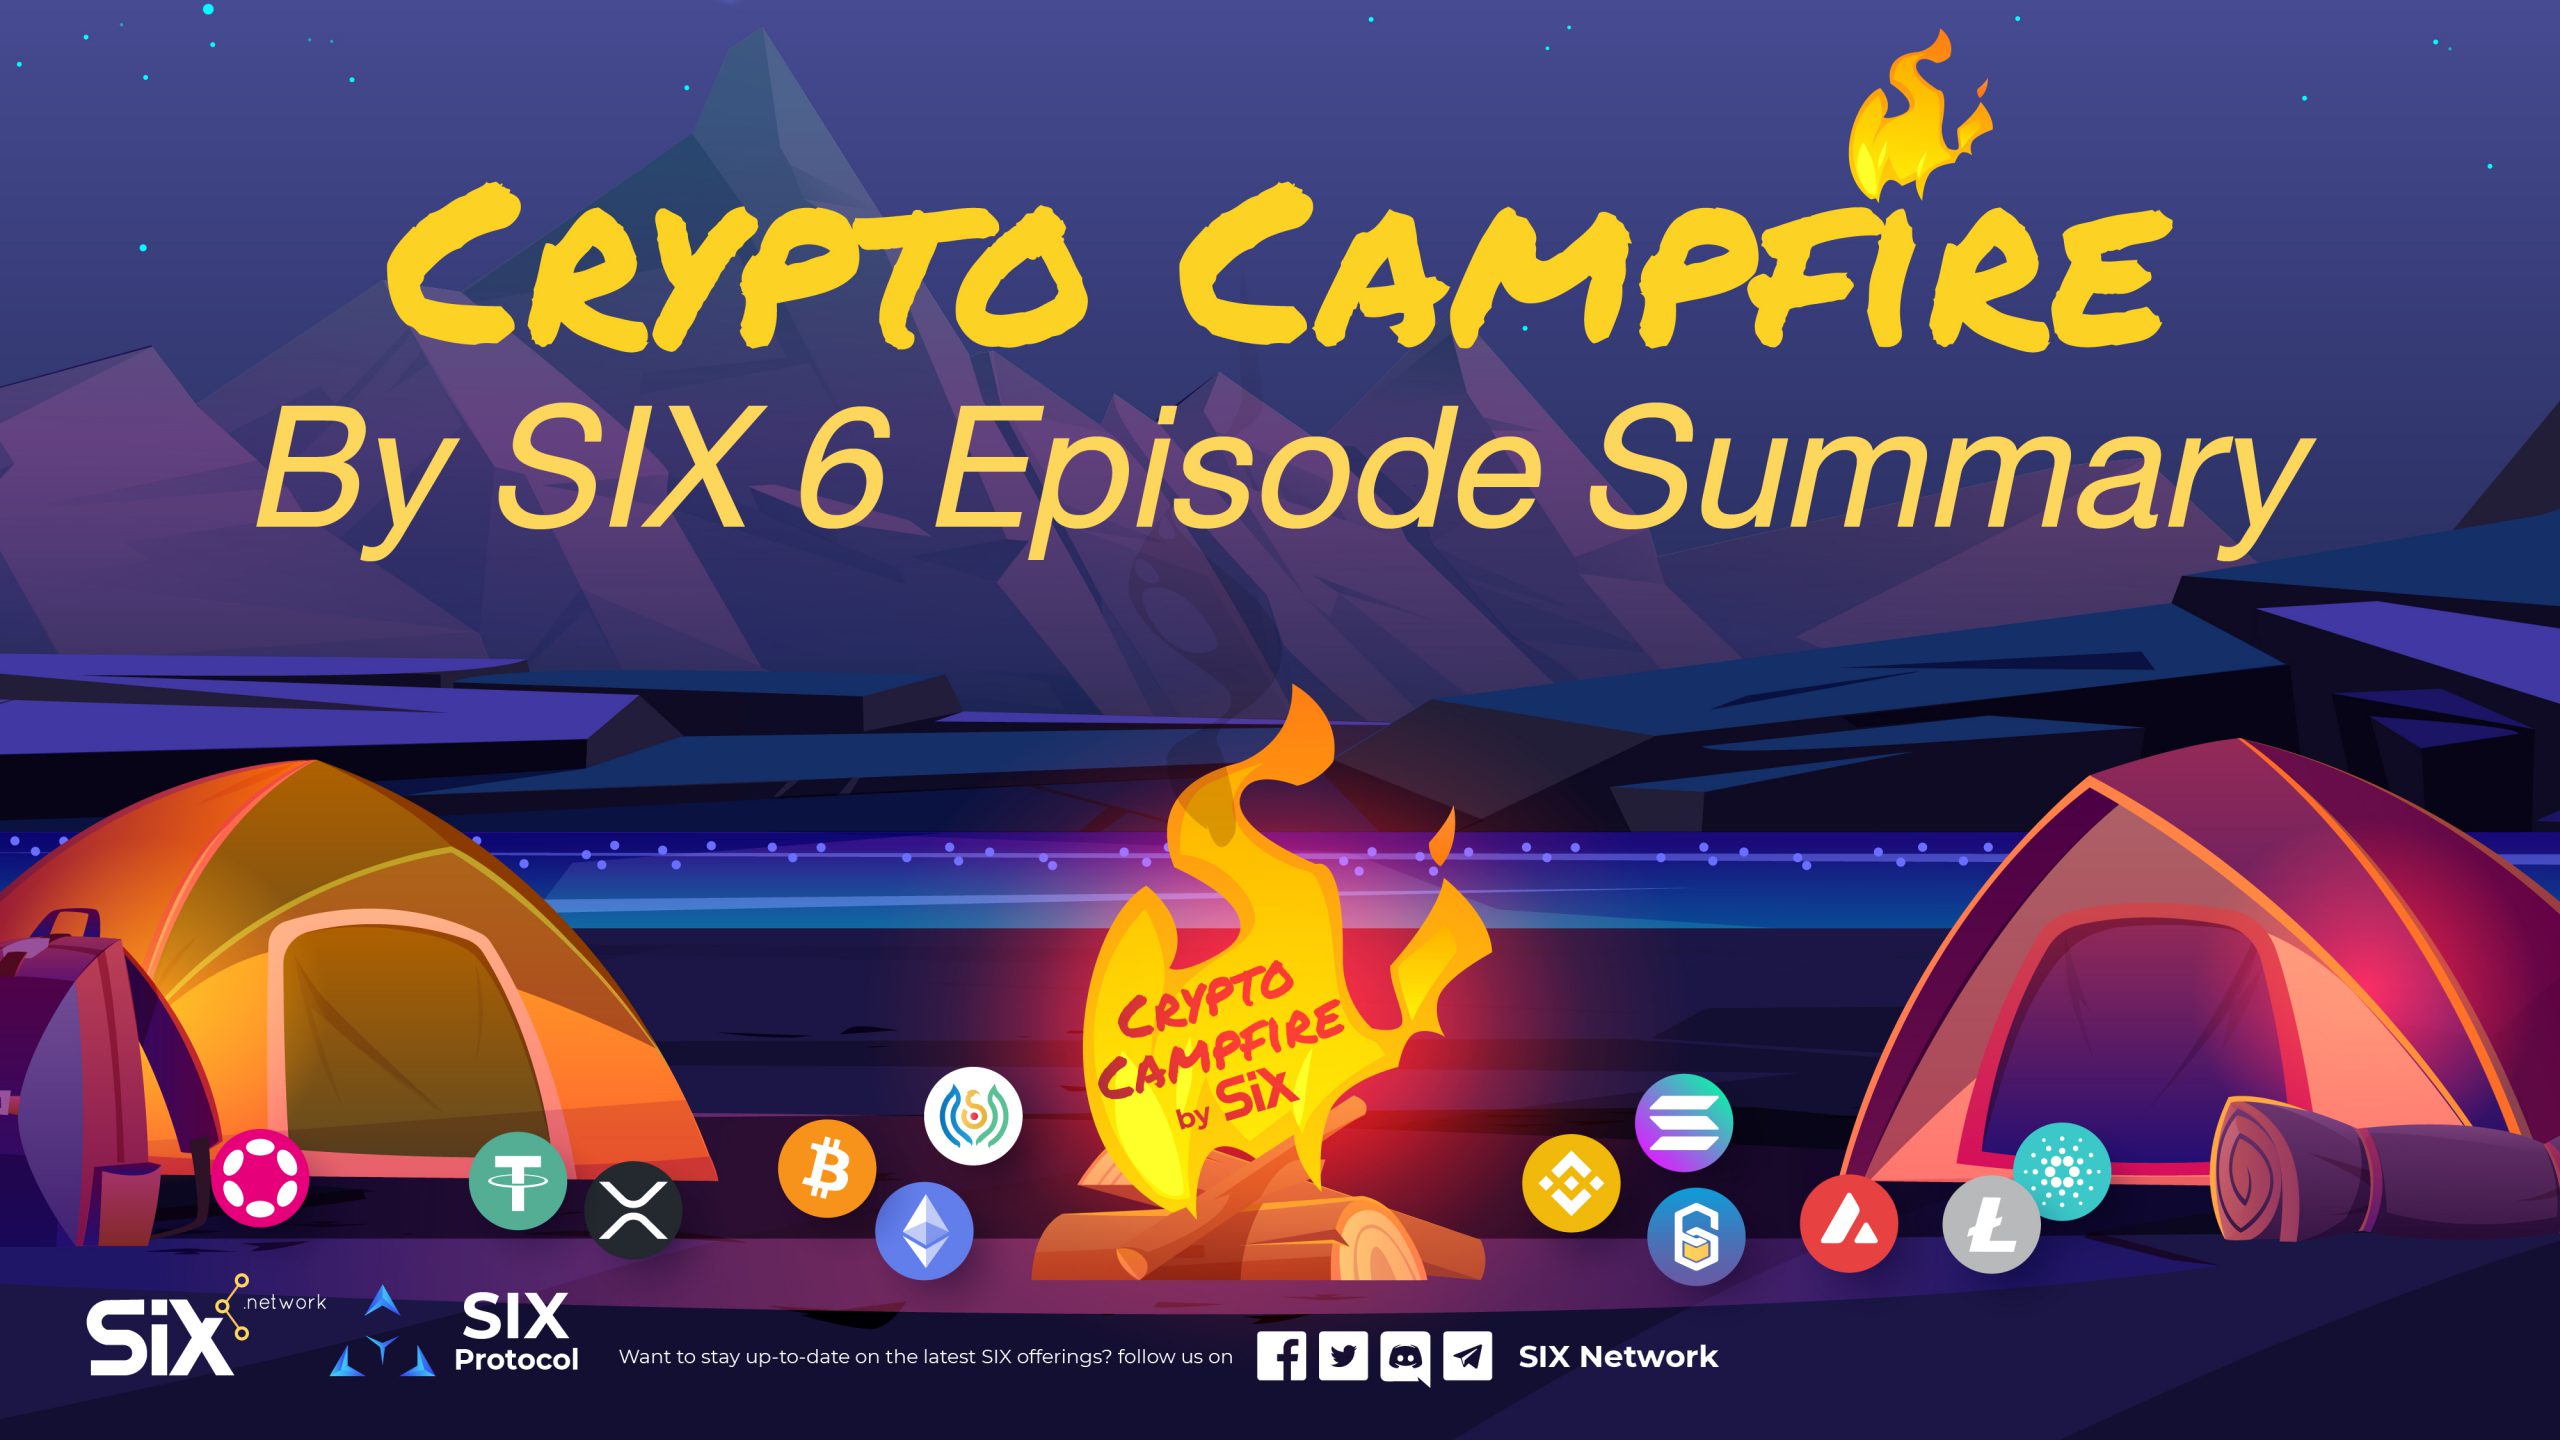 Crypto Campfire by SIX 6 Episode Summary